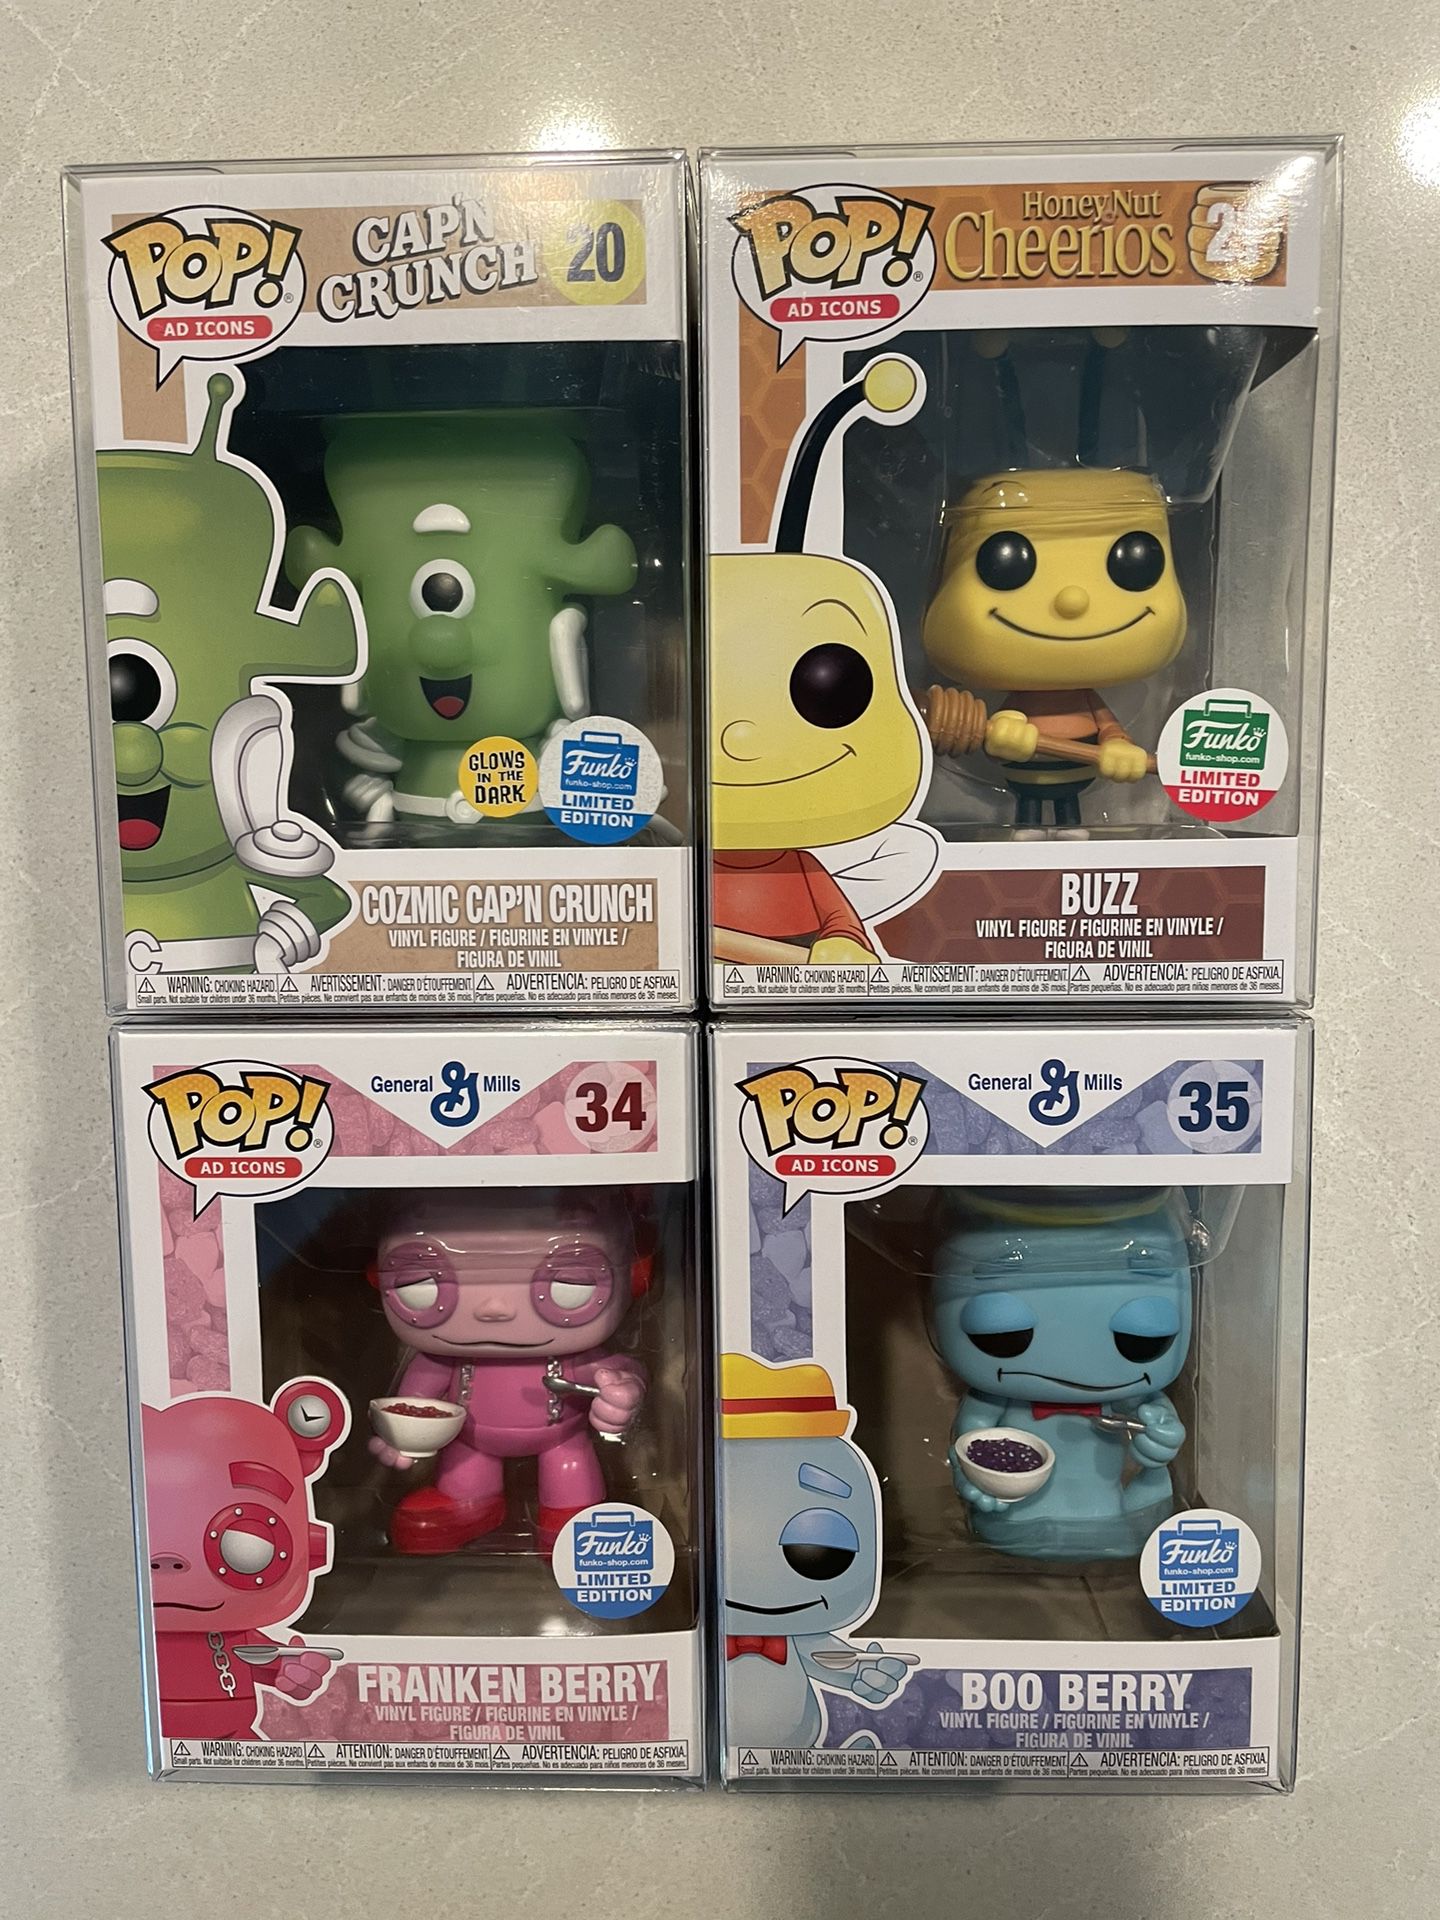 GLOW Cozmic Cap’n Crunch Buzz FrankenBerry Boo Berry Cereal Funko Pop Set *VAULTED* Shop Exclusive Ad Icons 34 35 General Mills Cheerios Quaker Oats